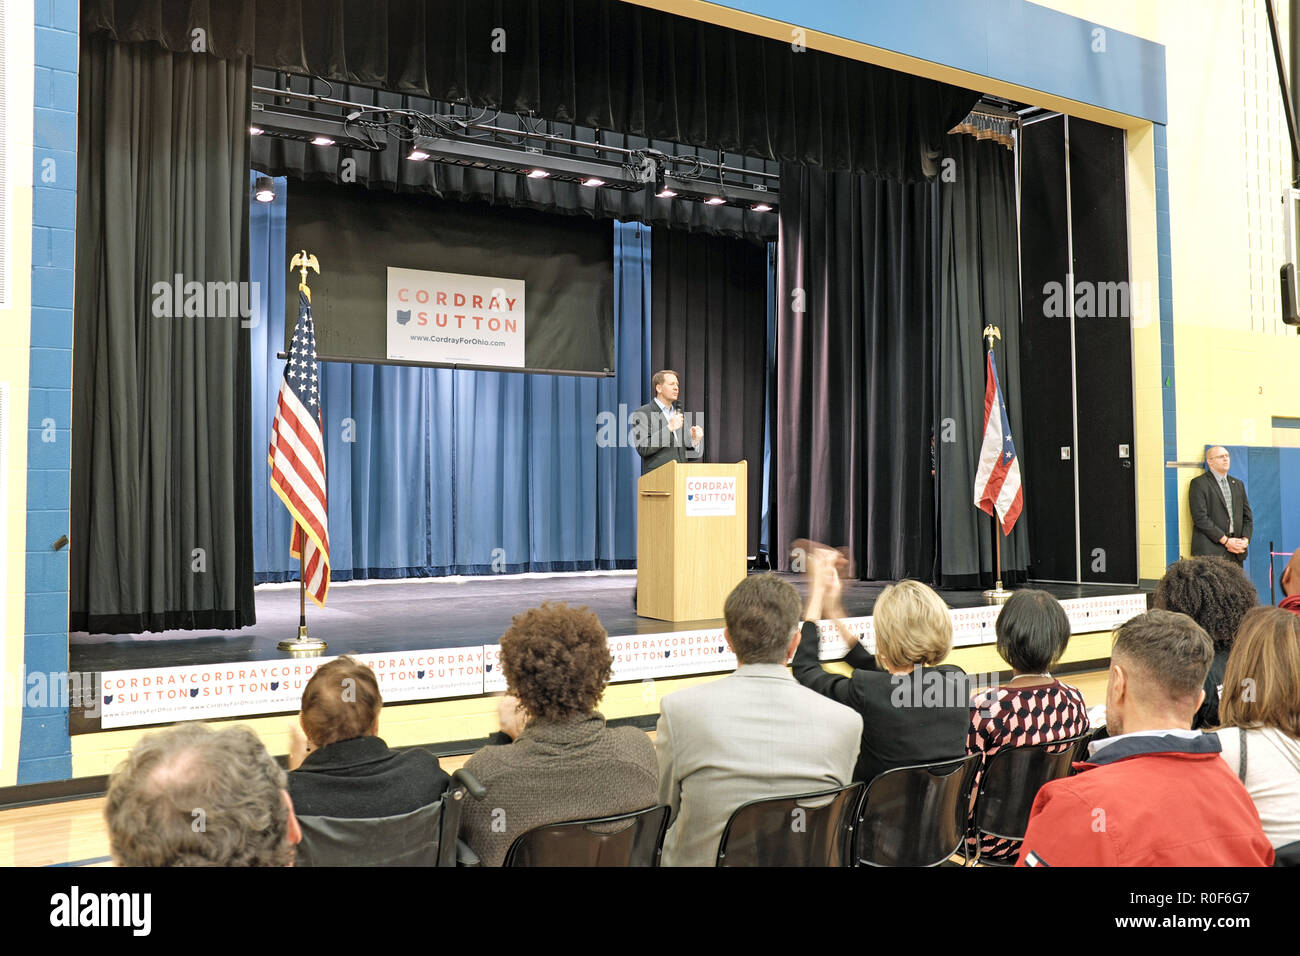 Cleveland, Ohio, USA.  4th Nov, 2018.  Richard Cordray speaks at the podium during a democratic rally at George Washington Carver School in Cleveland, Ohio, USA.  He is on stage campaigning to be the next governor of Ohio during the upcoming US midterm elections.  Credit: Mark Kanning/Alamy Live News. Stock Photo